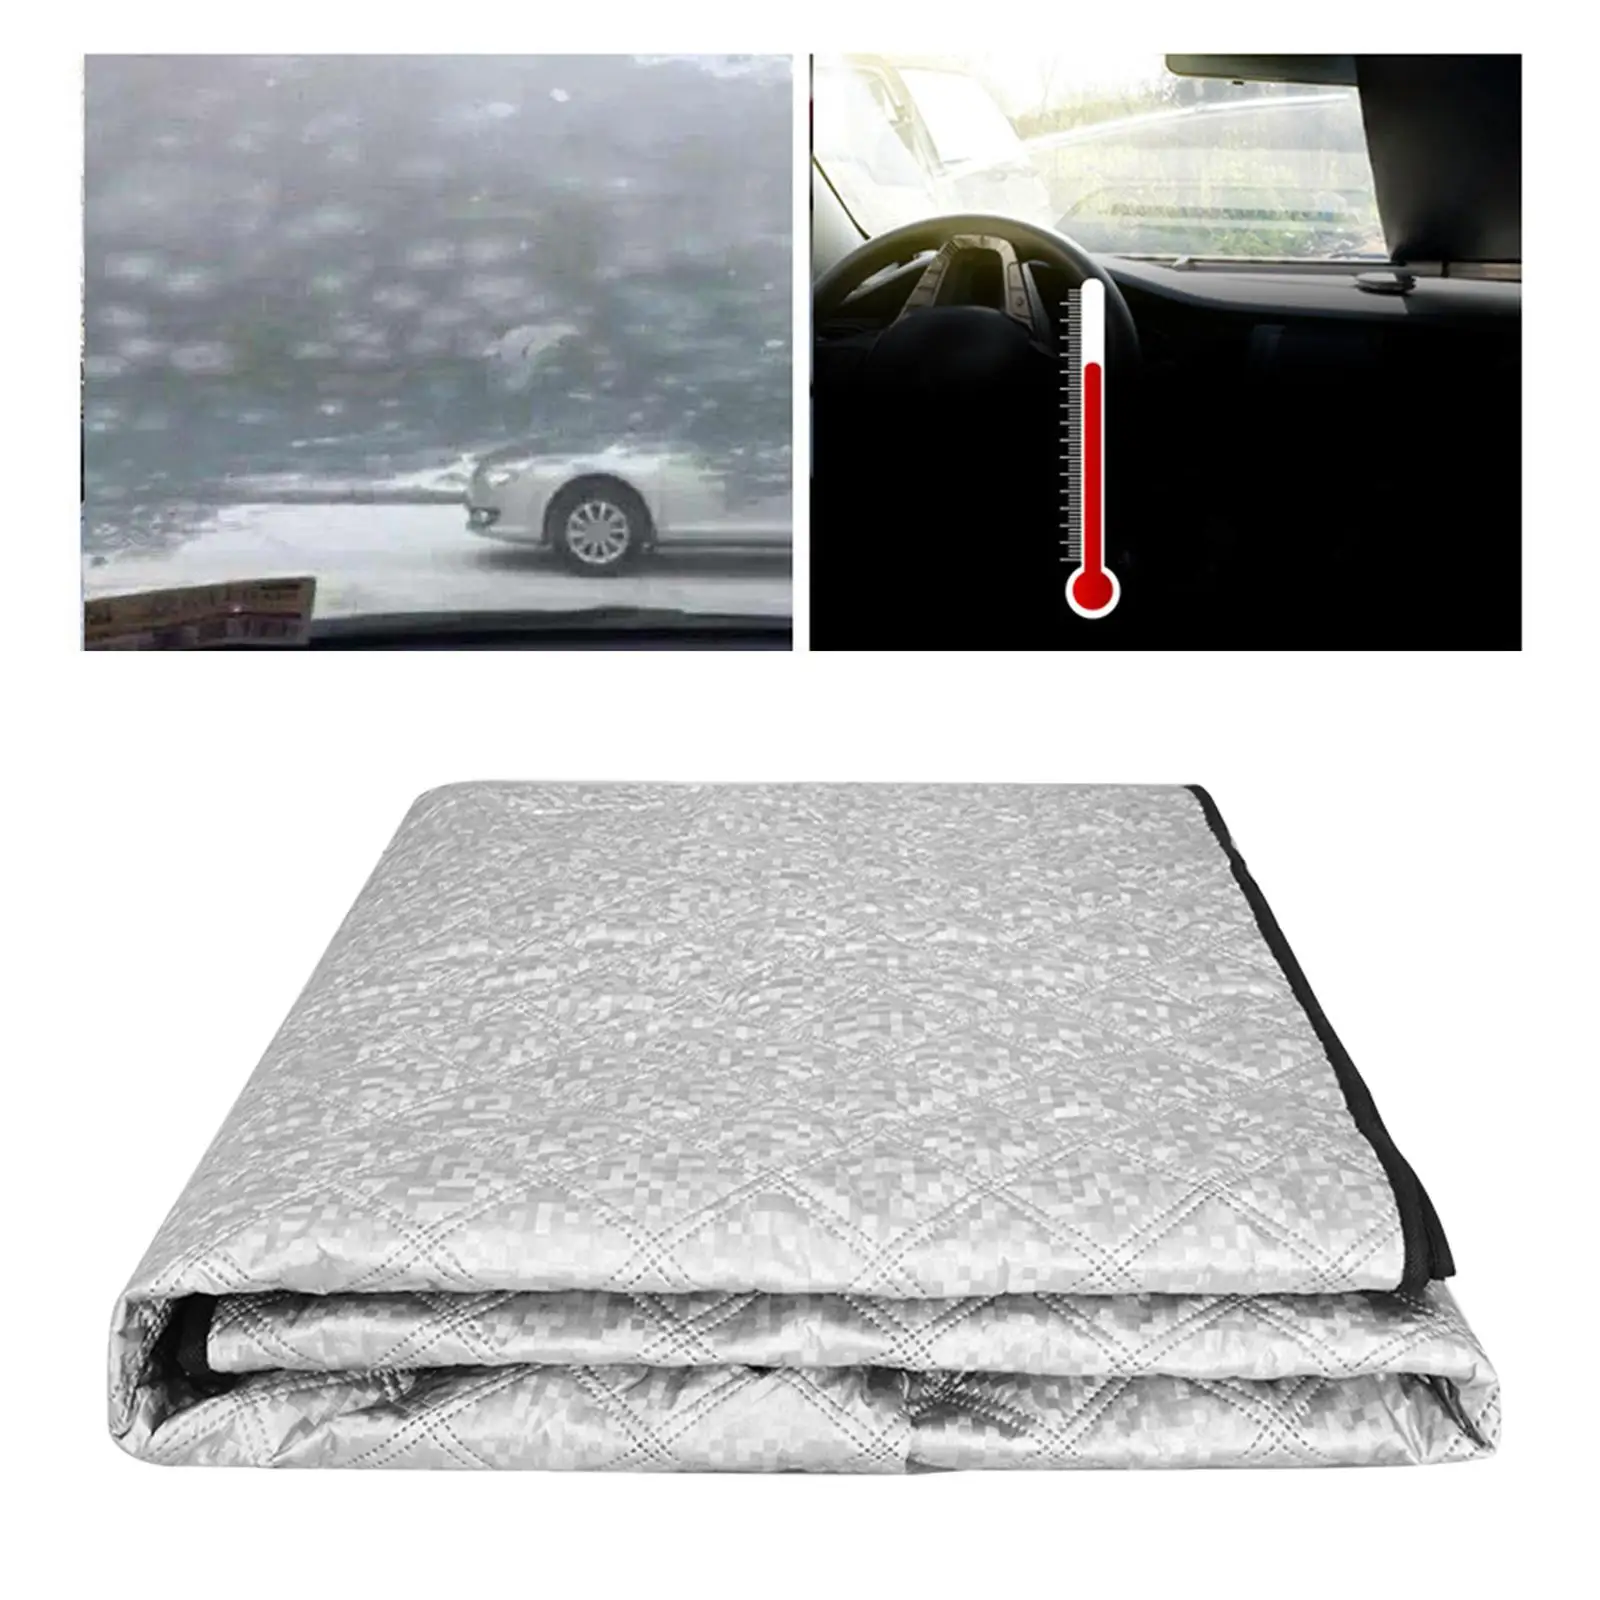 Large Car Windshield Snow Cover Foldable Winter & Summer Frost Protection for Truck SUV